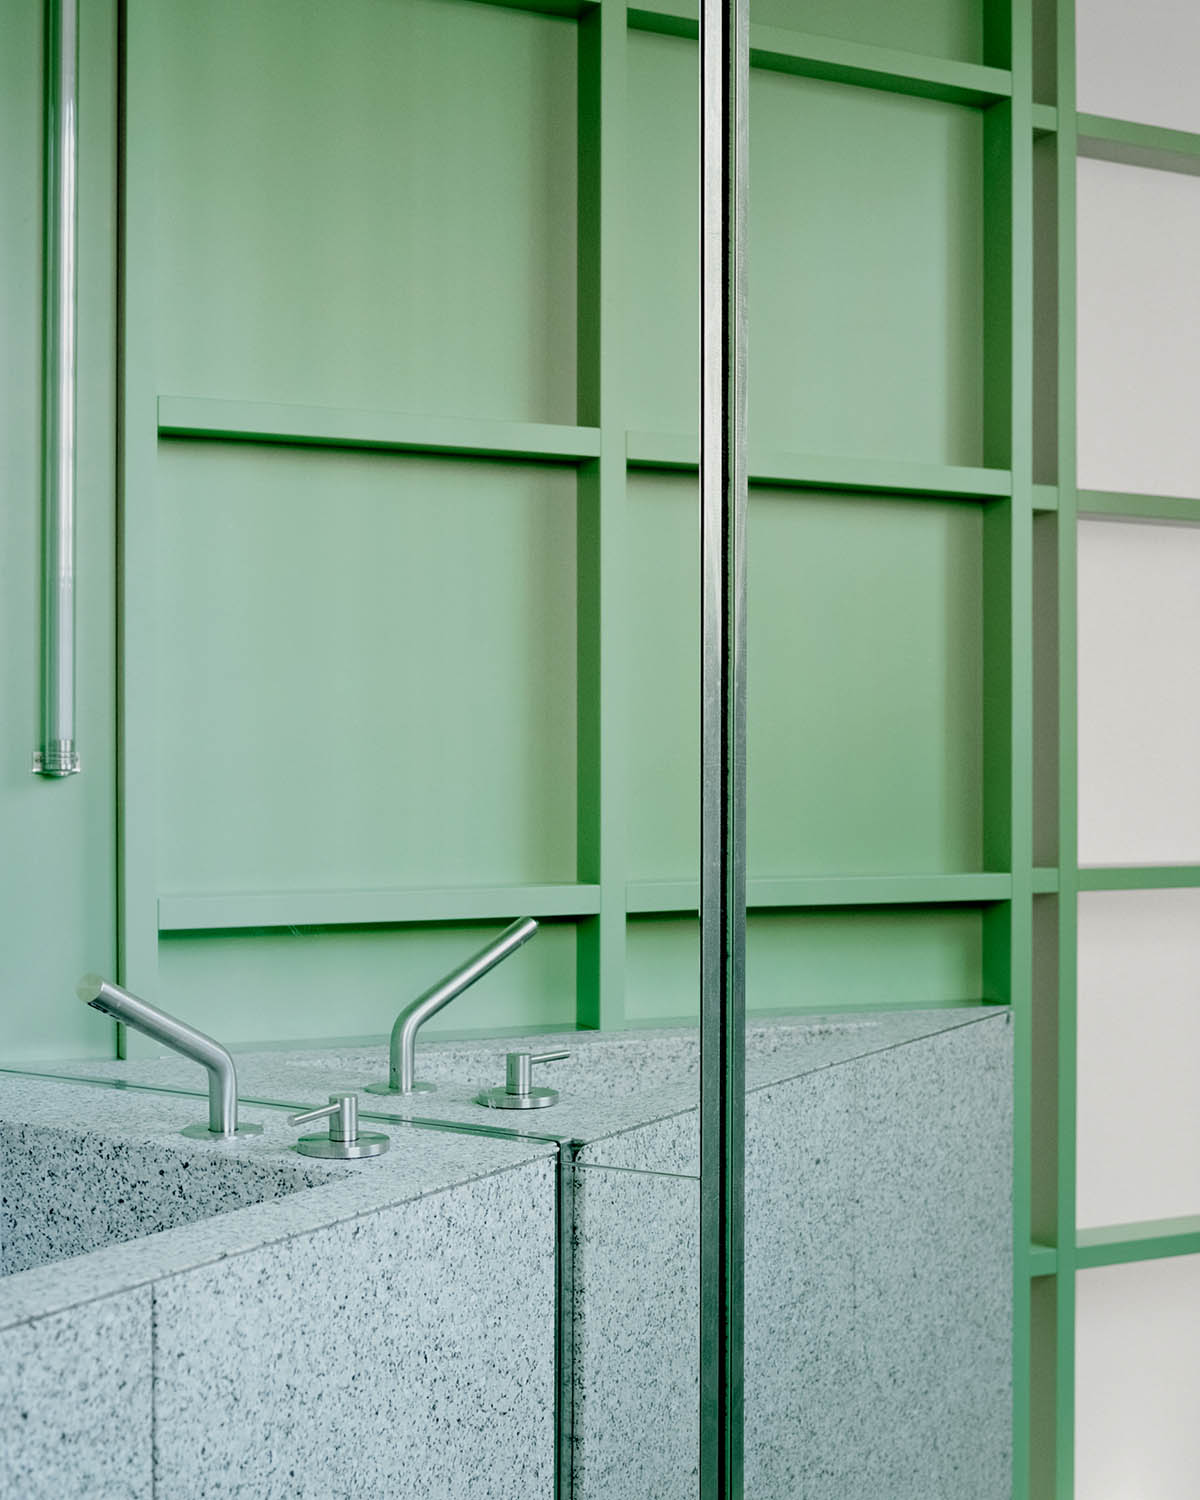 studio wok adds soft green tones and powder colors to interiors of a bakery in Milan 